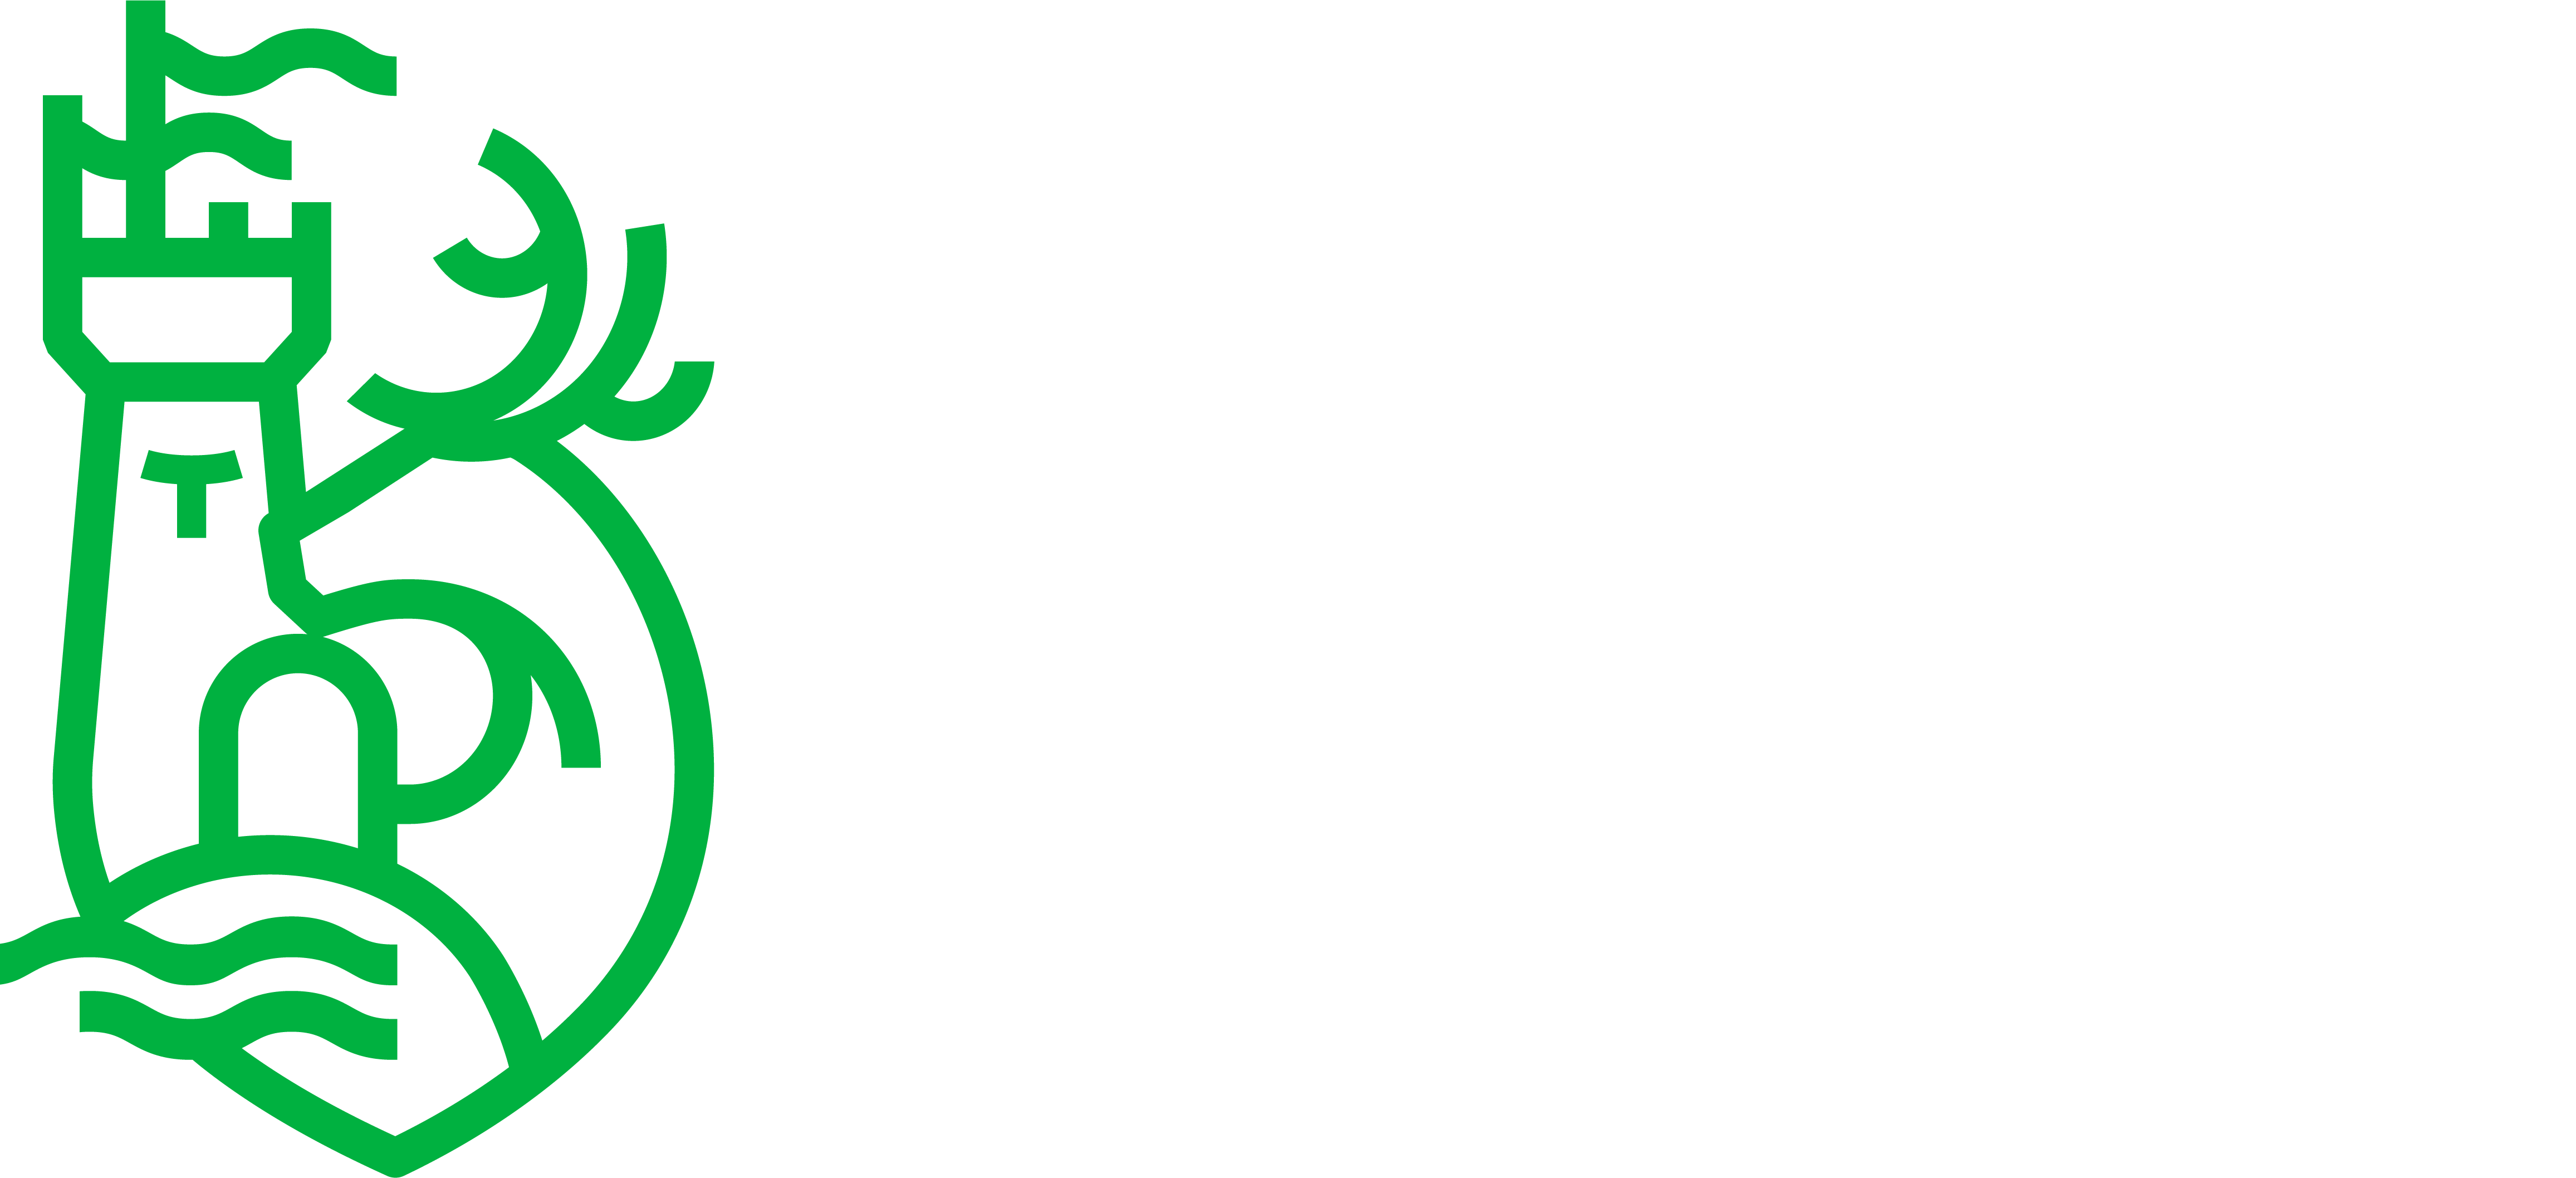 University of Limerick logo in green with the text in white